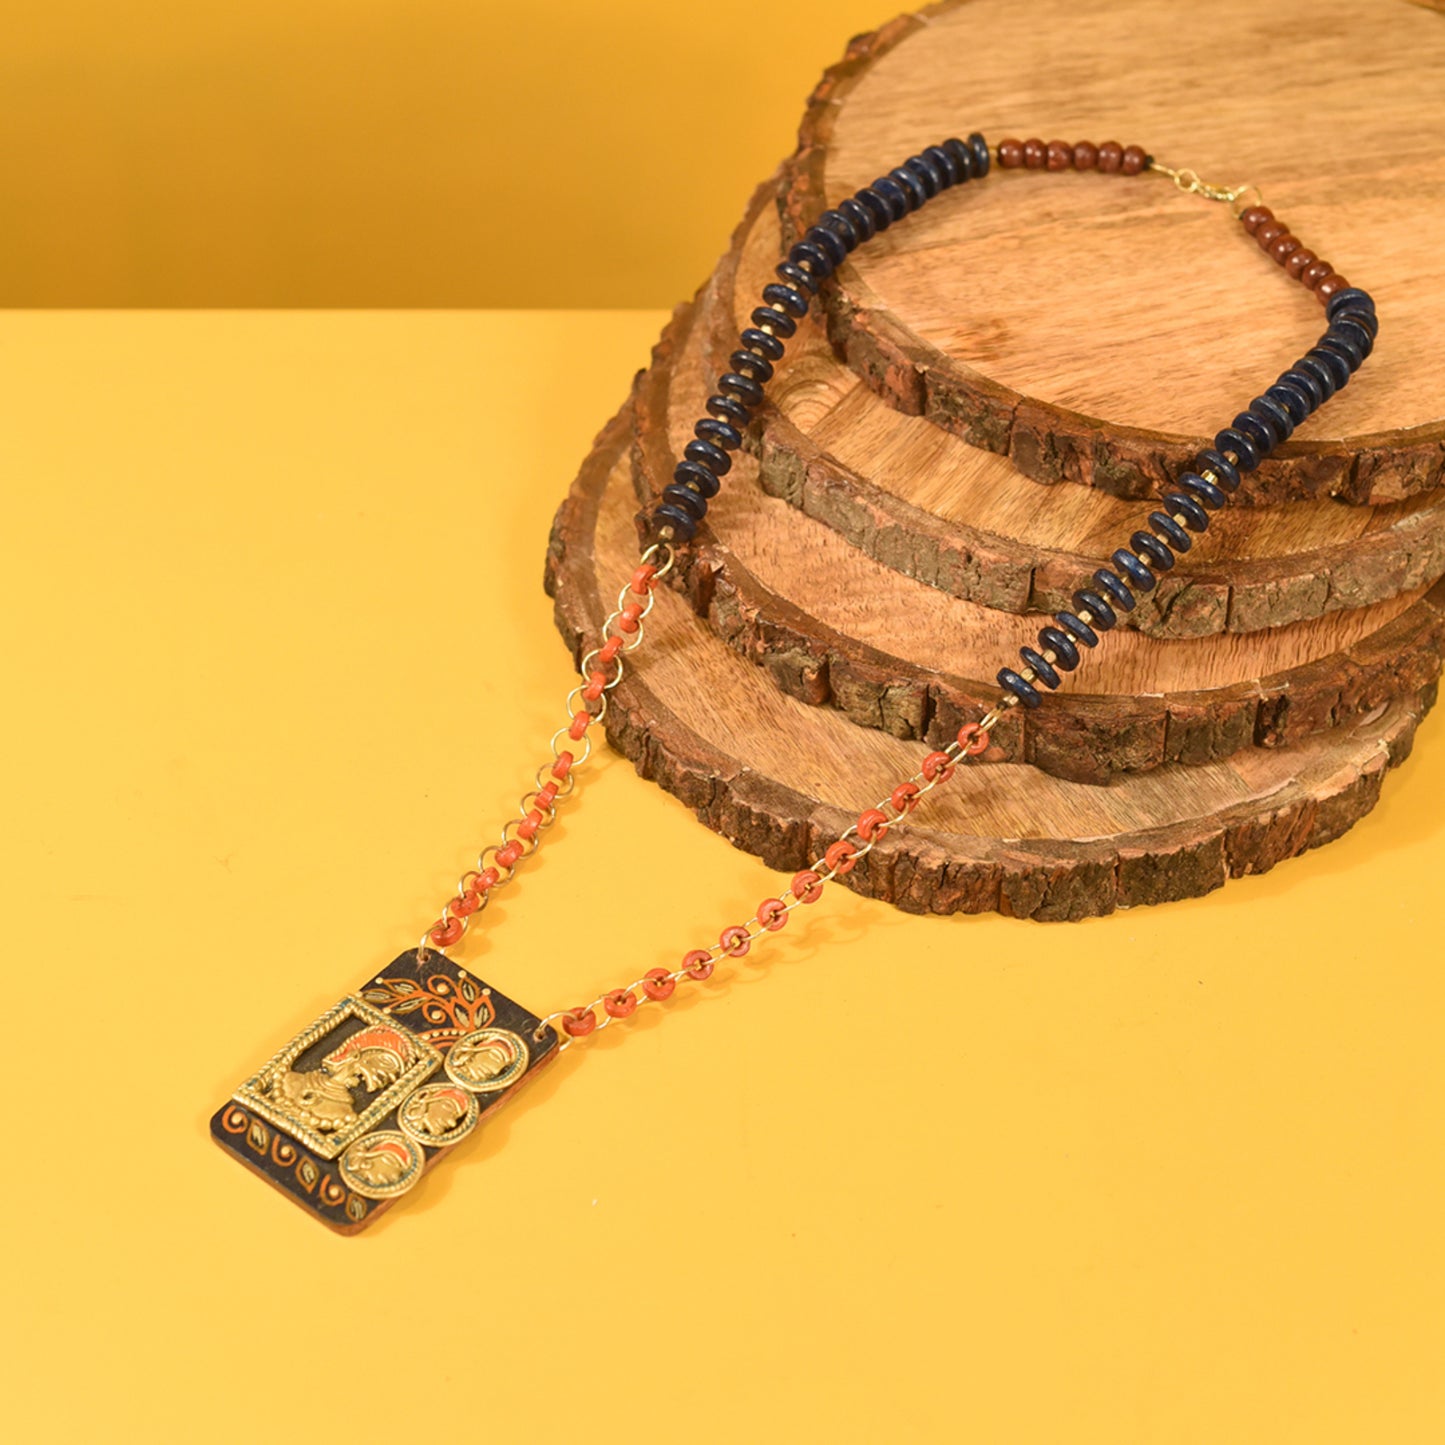 Kingdoms of Nile Handcrafted Necklace